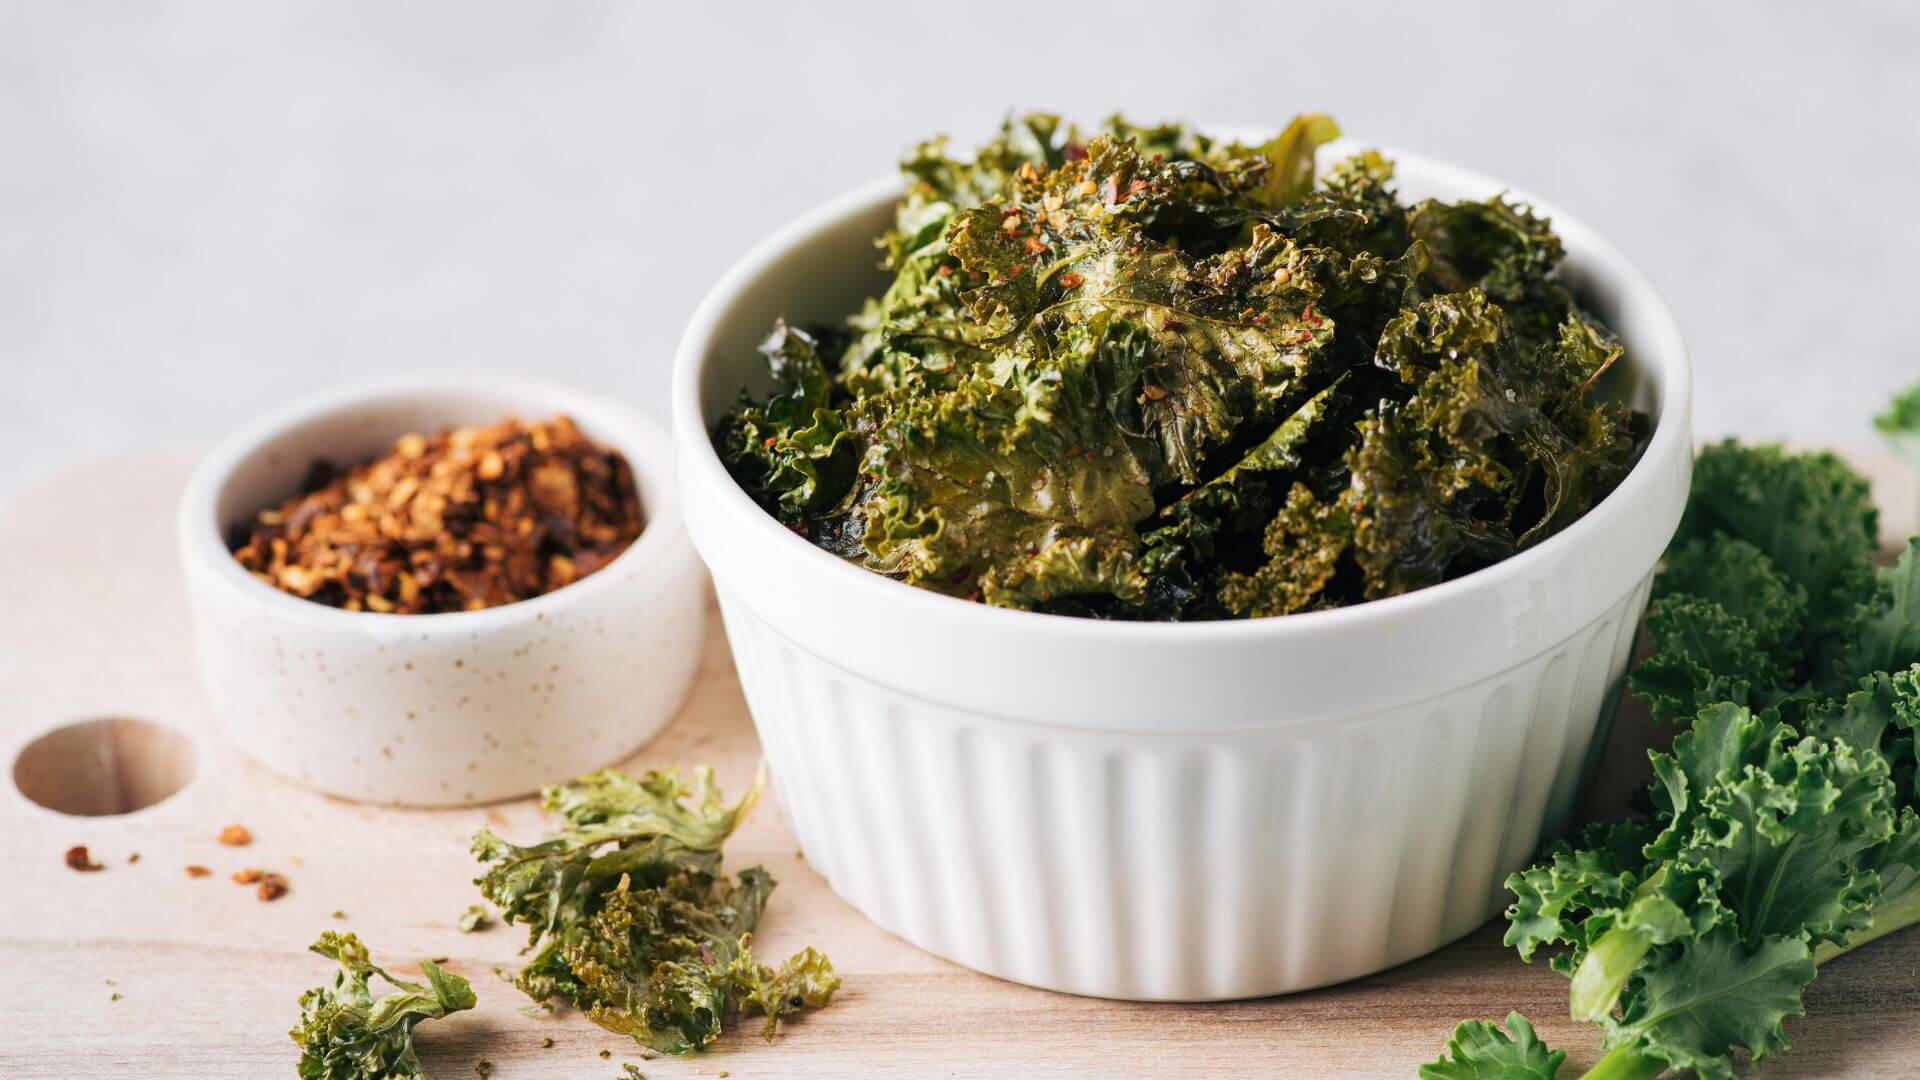 Kale Chips: Mastering the Art of Homemade Kale Chips